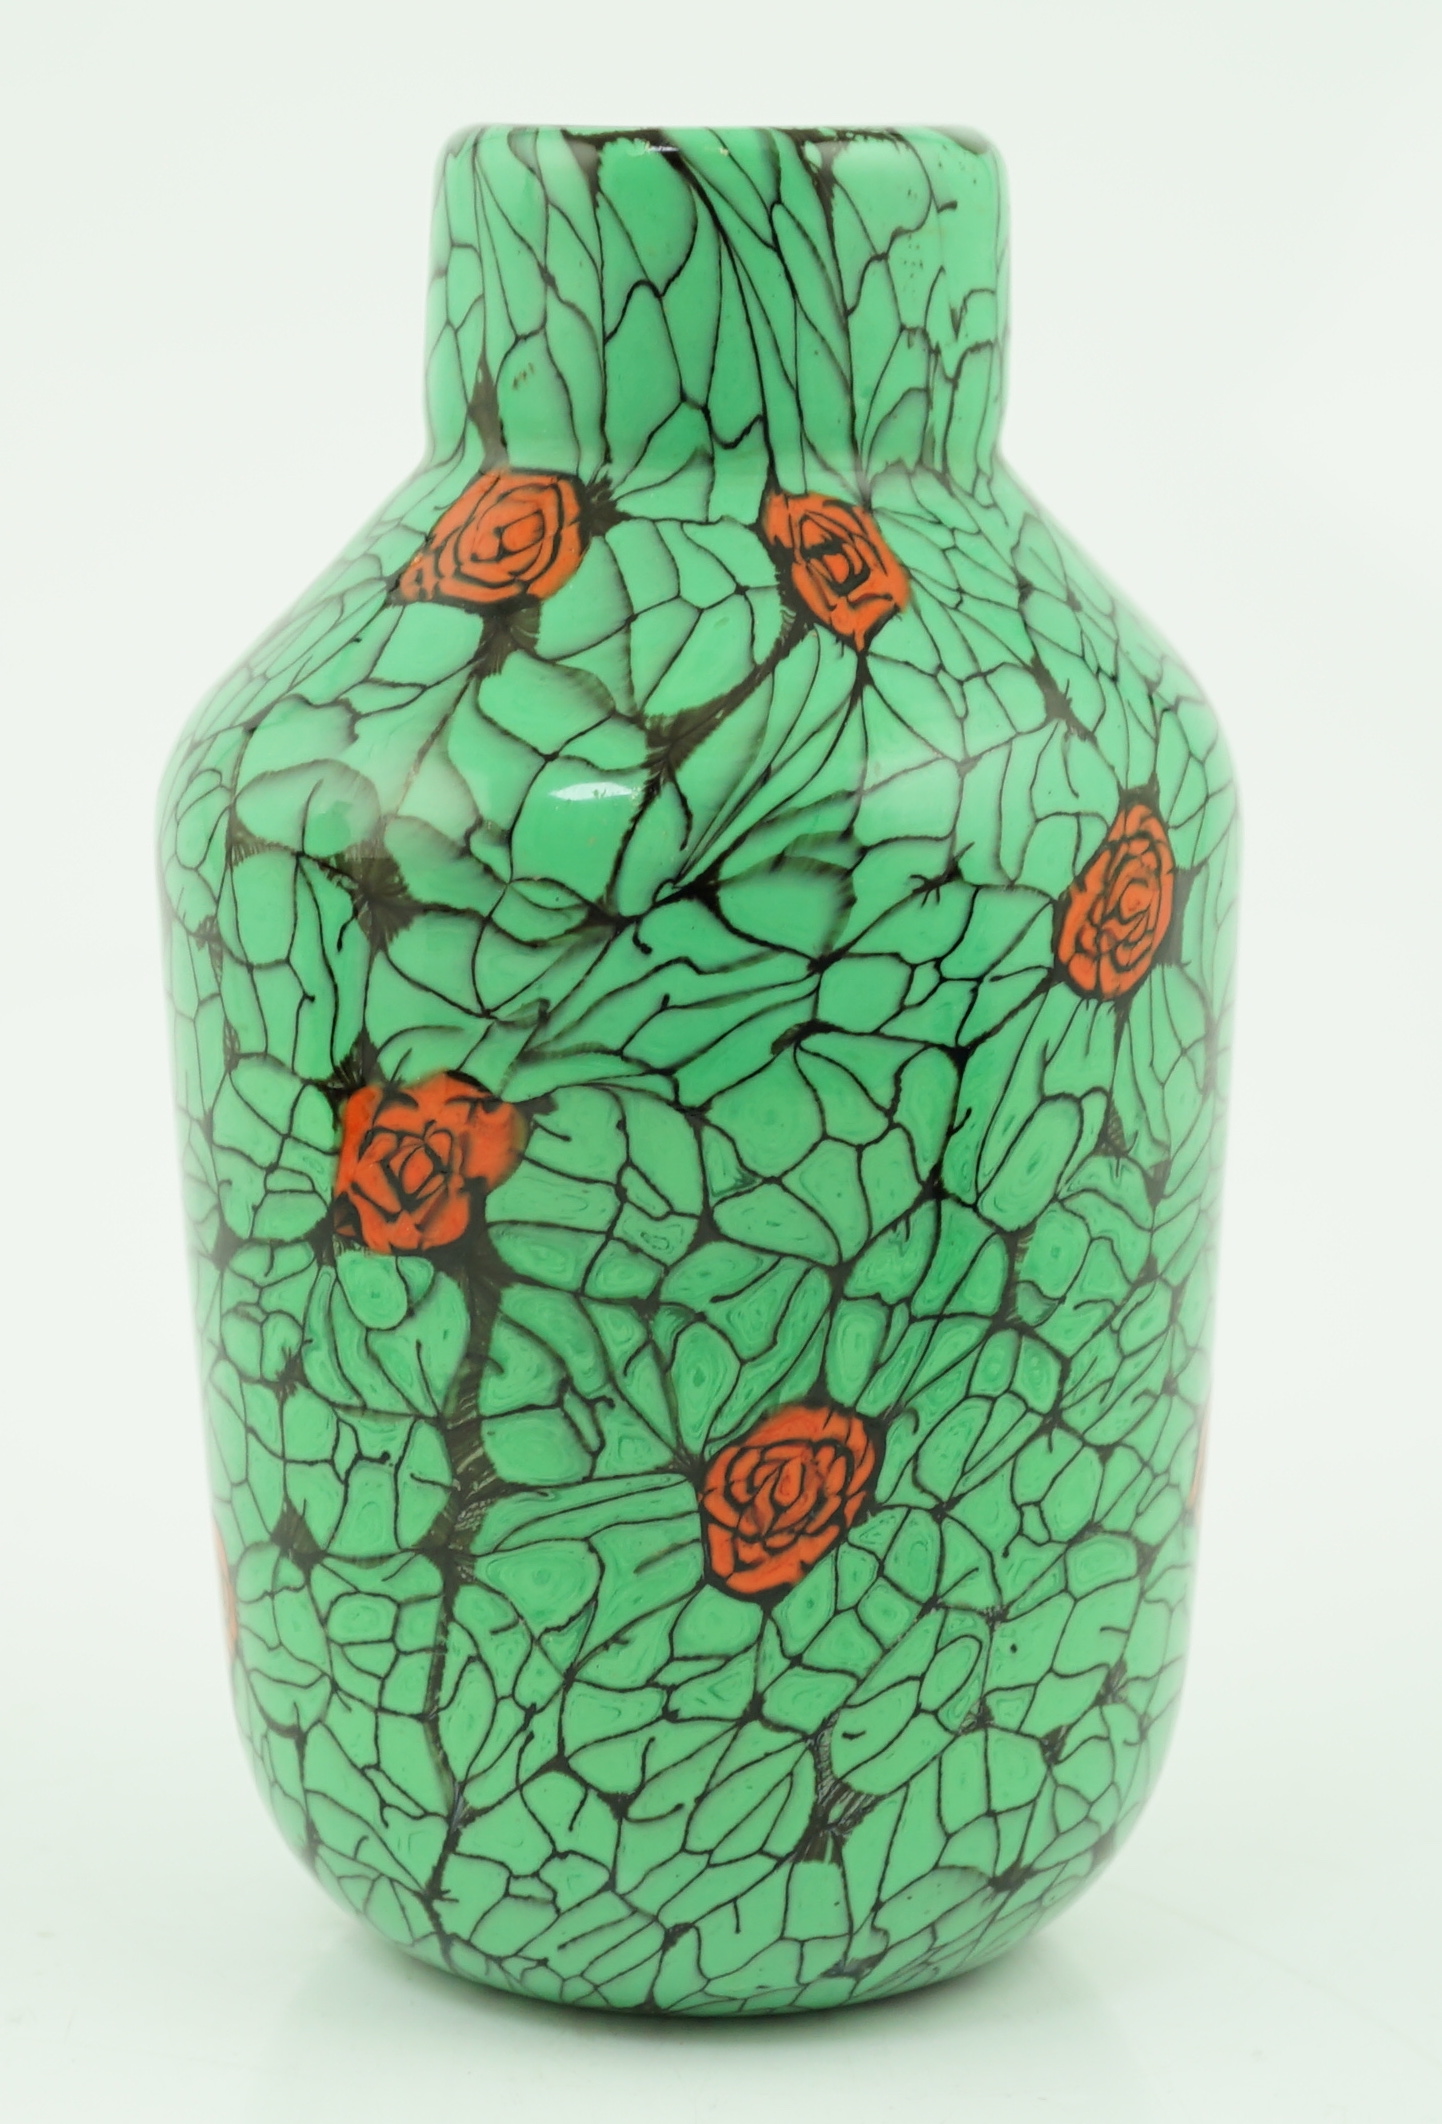 Vittorio Ferro (1932-2012) A Murano glass Murrine vase, with green leaves and red rose buds, signed, 19cms, Please note this lot attracts an additional import tax of 20% on the hammer price